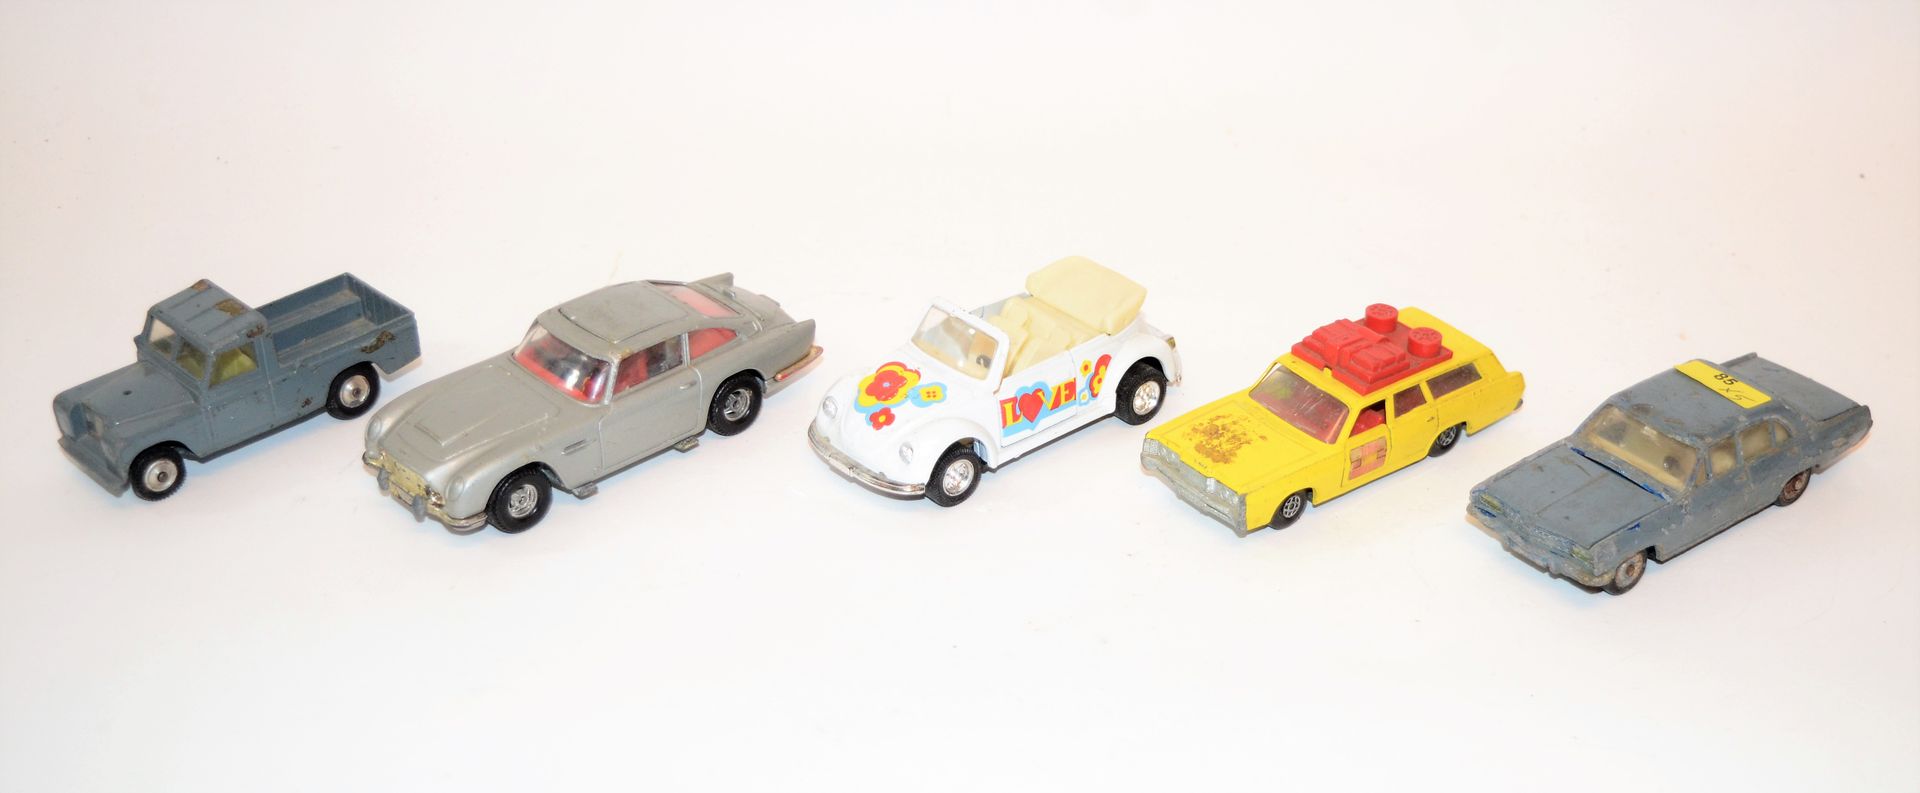 Null Lot of 5 metal cars:

-GORGI TOYS: Land Rover 109 W.B, average condition, m&hellip;